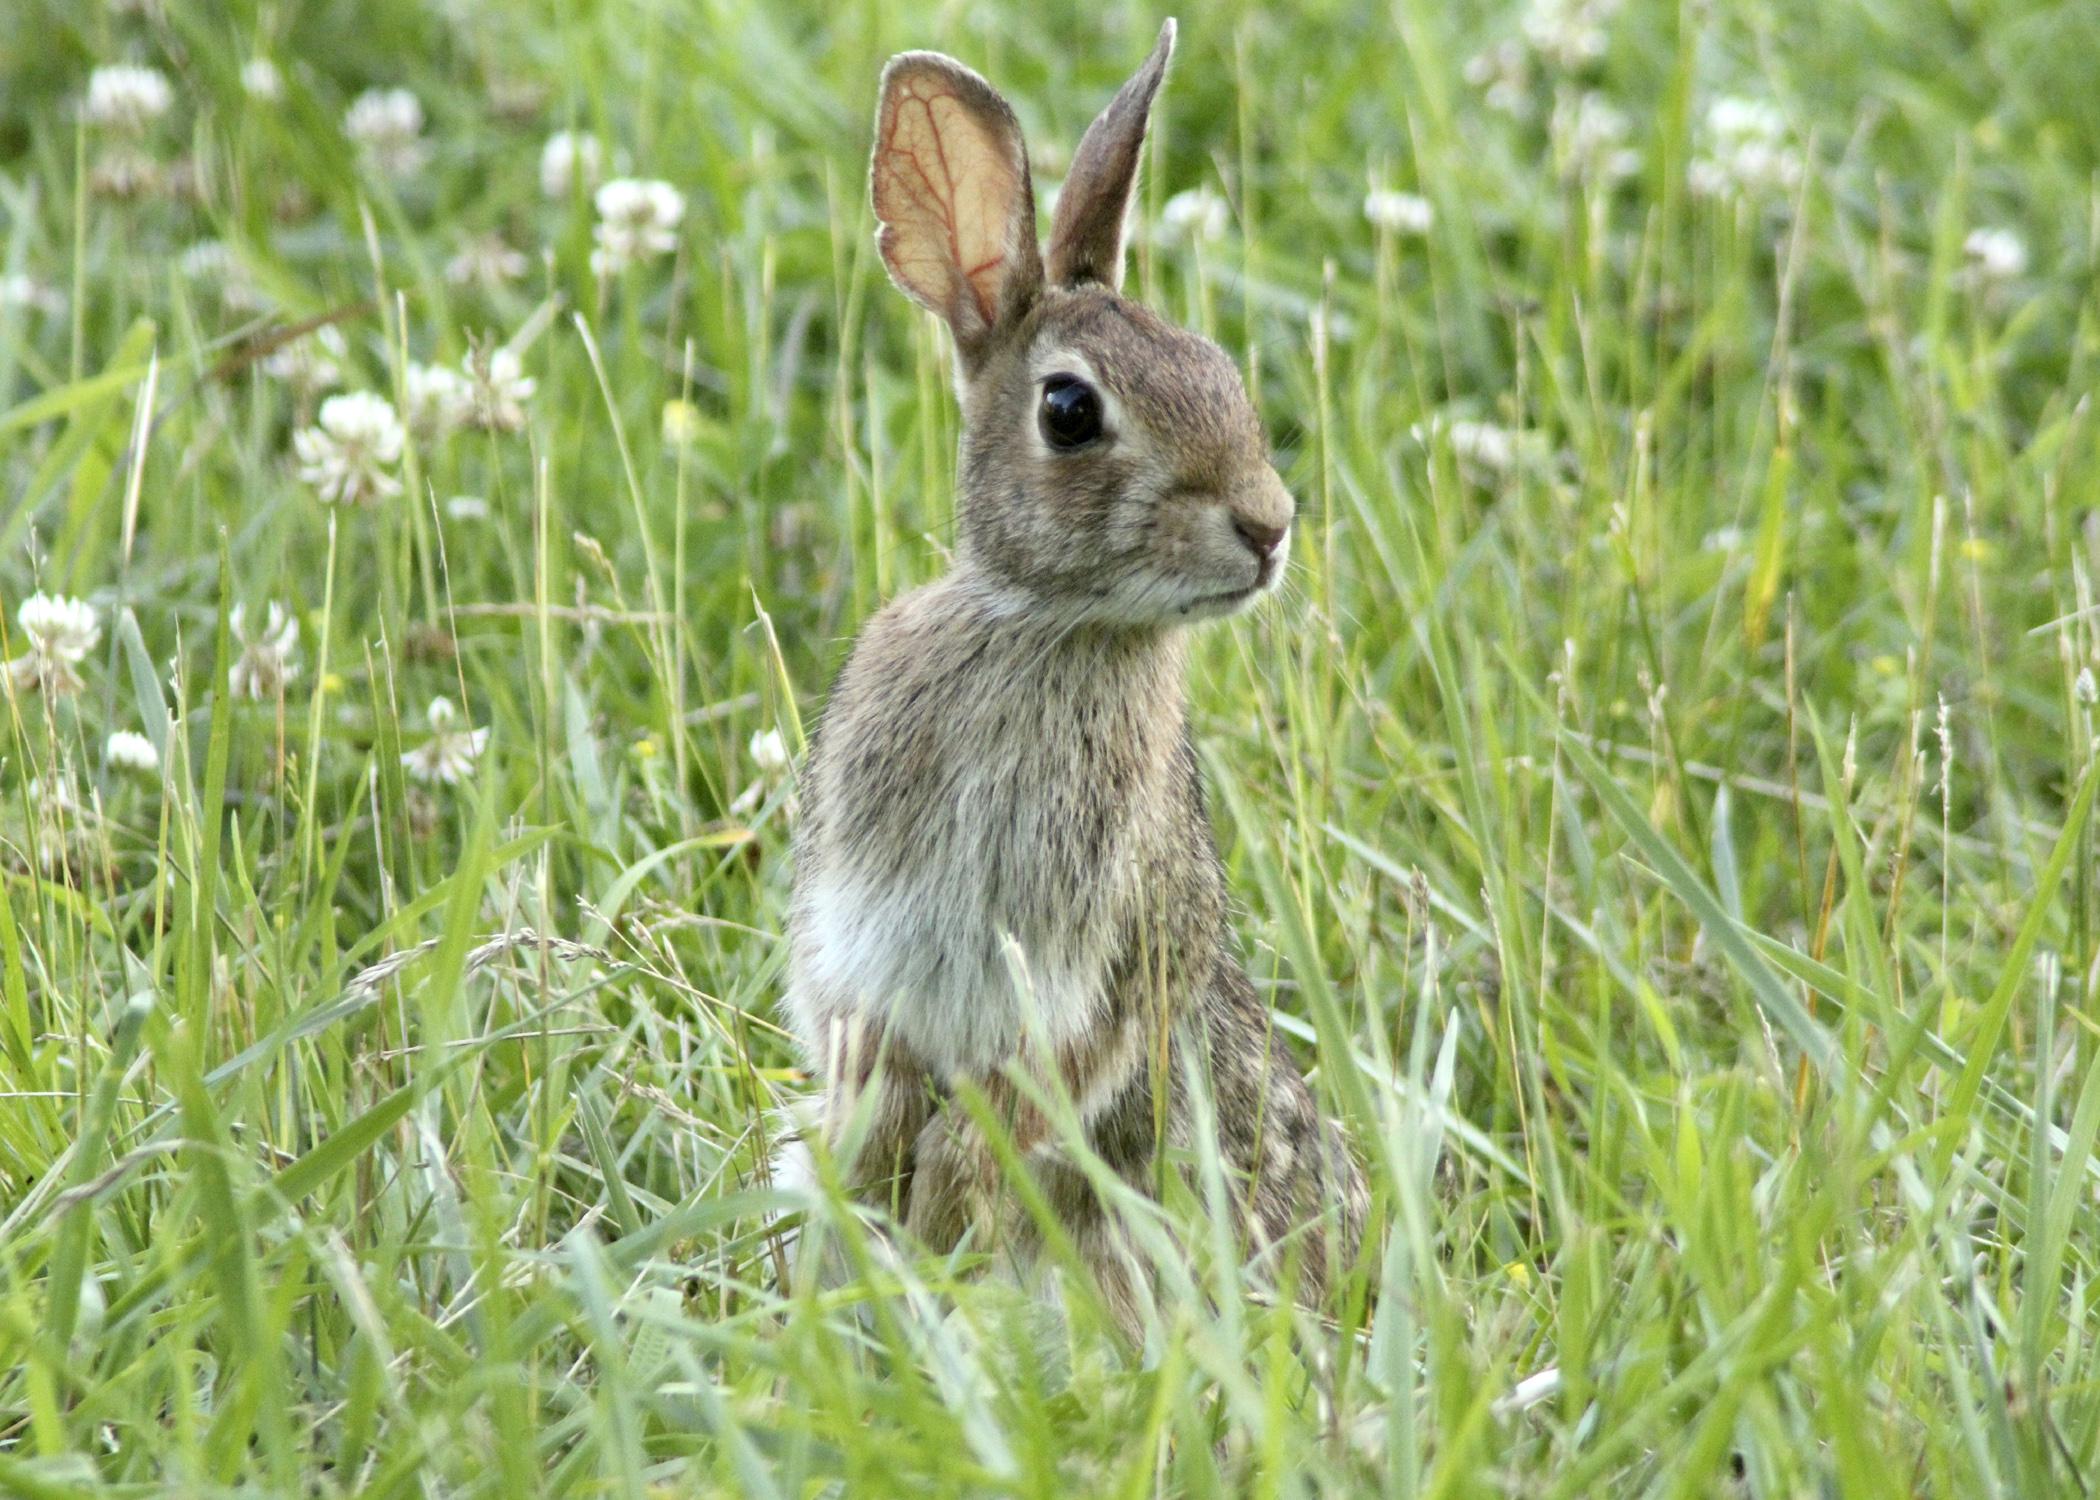 Eastern cottontail rabbits are common in urban, suburban and rural areas where abundant food and shelter are available. (Photo by iStock)